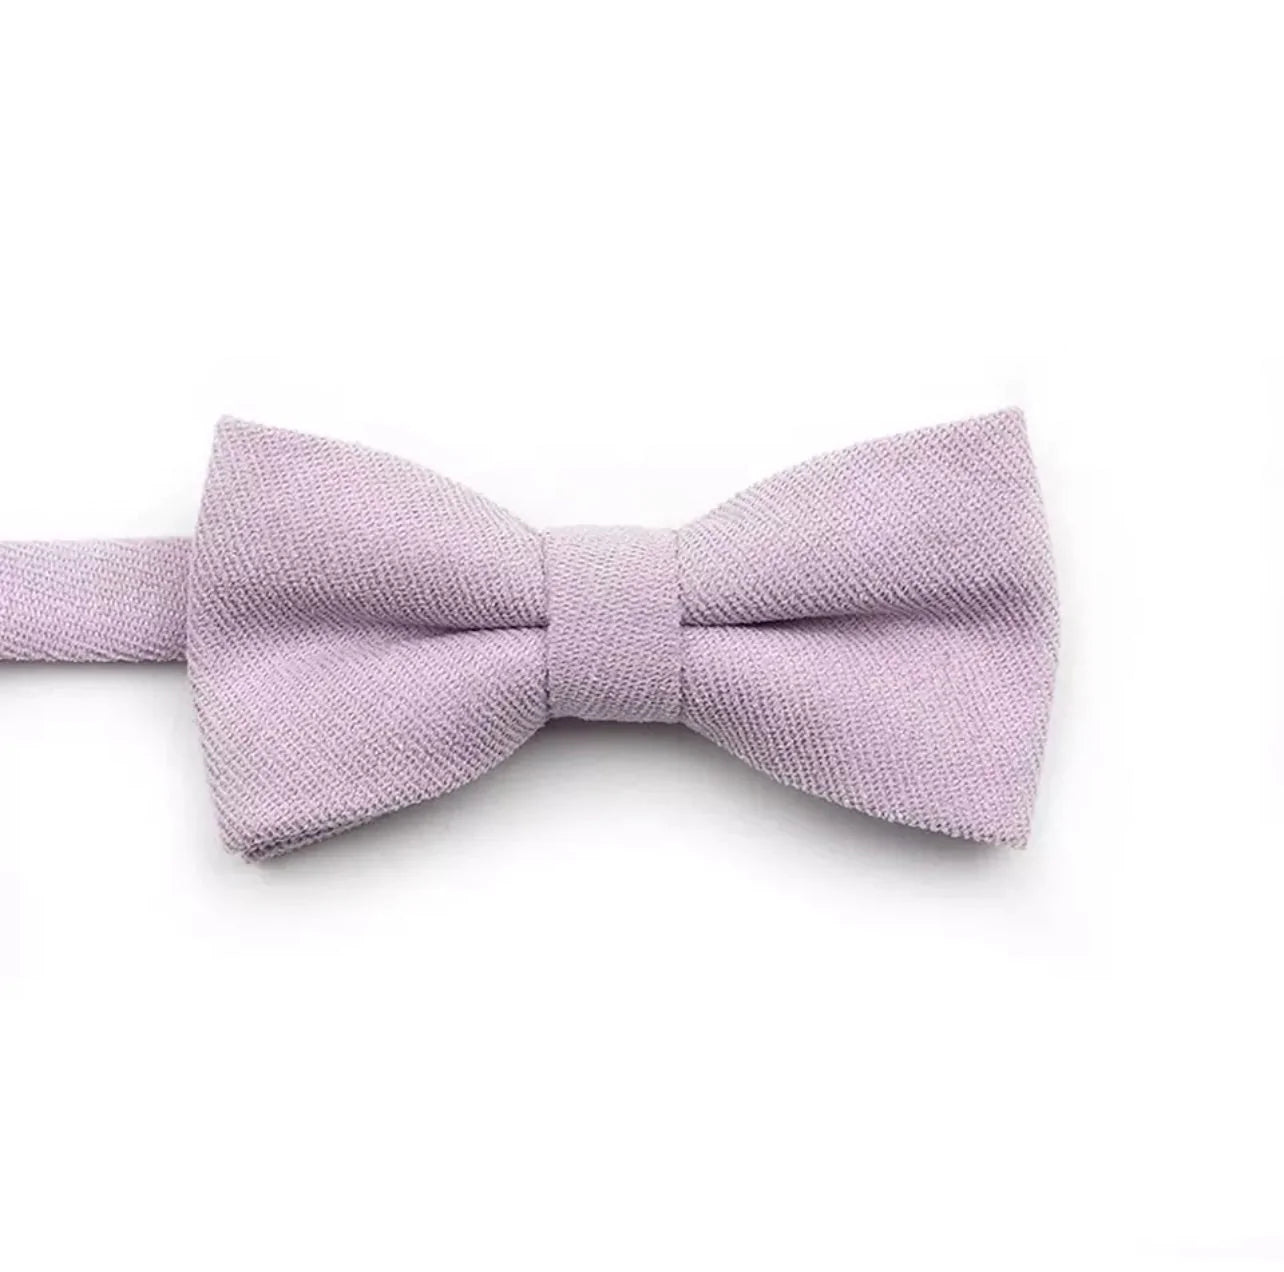 Purple bow tie for kids & boys (pre tied) weddings REMI - MYTIESHOP-Purple Bow tie for kids Bow Tie 10.5 * 6CMfor toddlers and kidsColor: Purple Adjustable strap - easy to clip Your little one is sure to make a stylish statement in this bow tie. Whether dressing up for a formal event or simply wanting to add a touch of personality to their outfit, this bow tie is a perfect choice. It's also a great choice for ring bearers or as a special gift. With its easy-to-use clip, your child will be able t